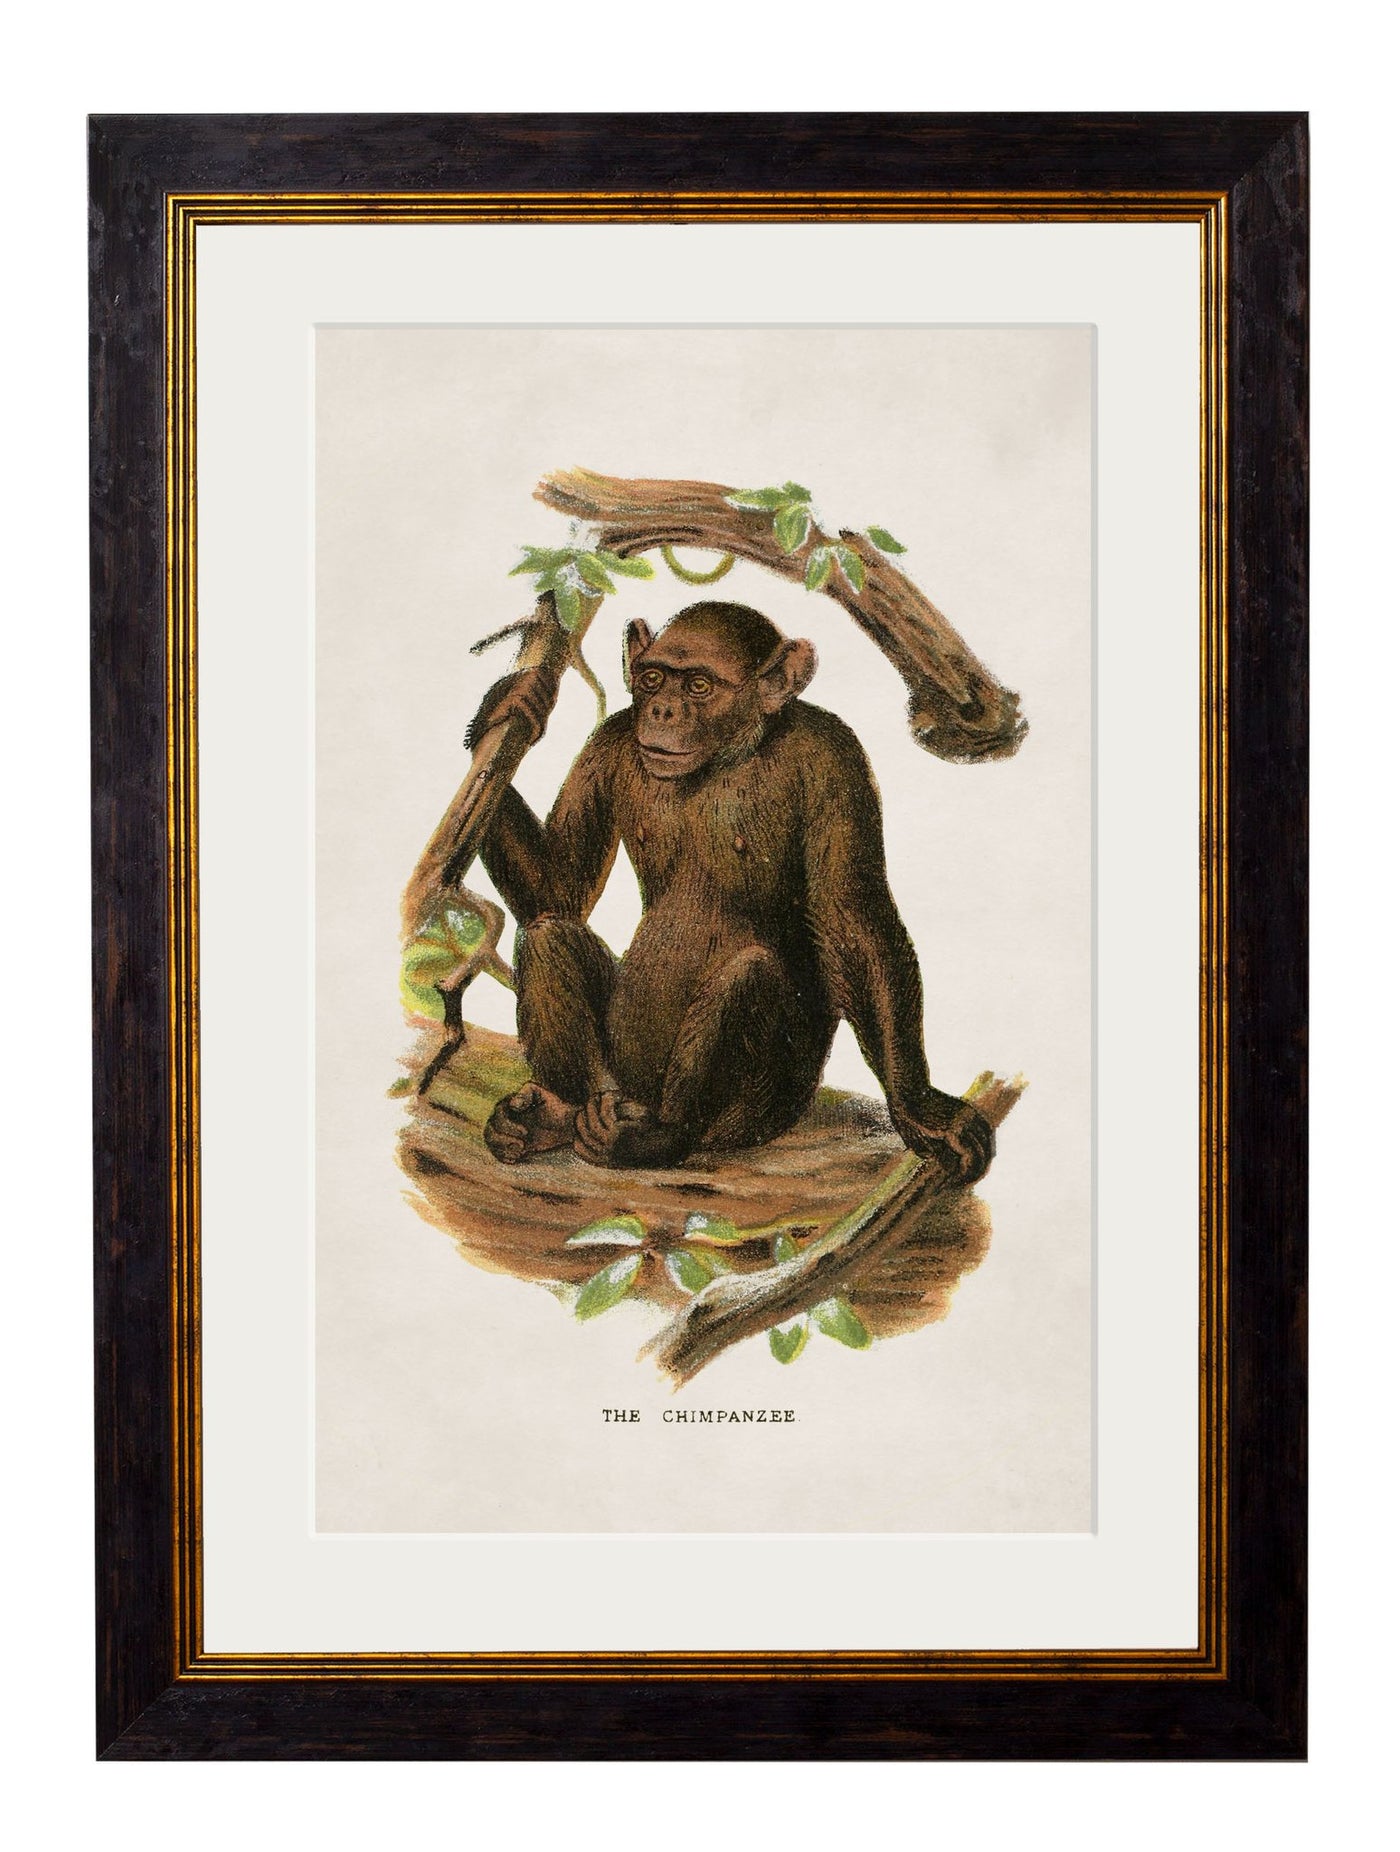 C.1910 COLLECTION OF PRIMATES - TheArtistsQuarter